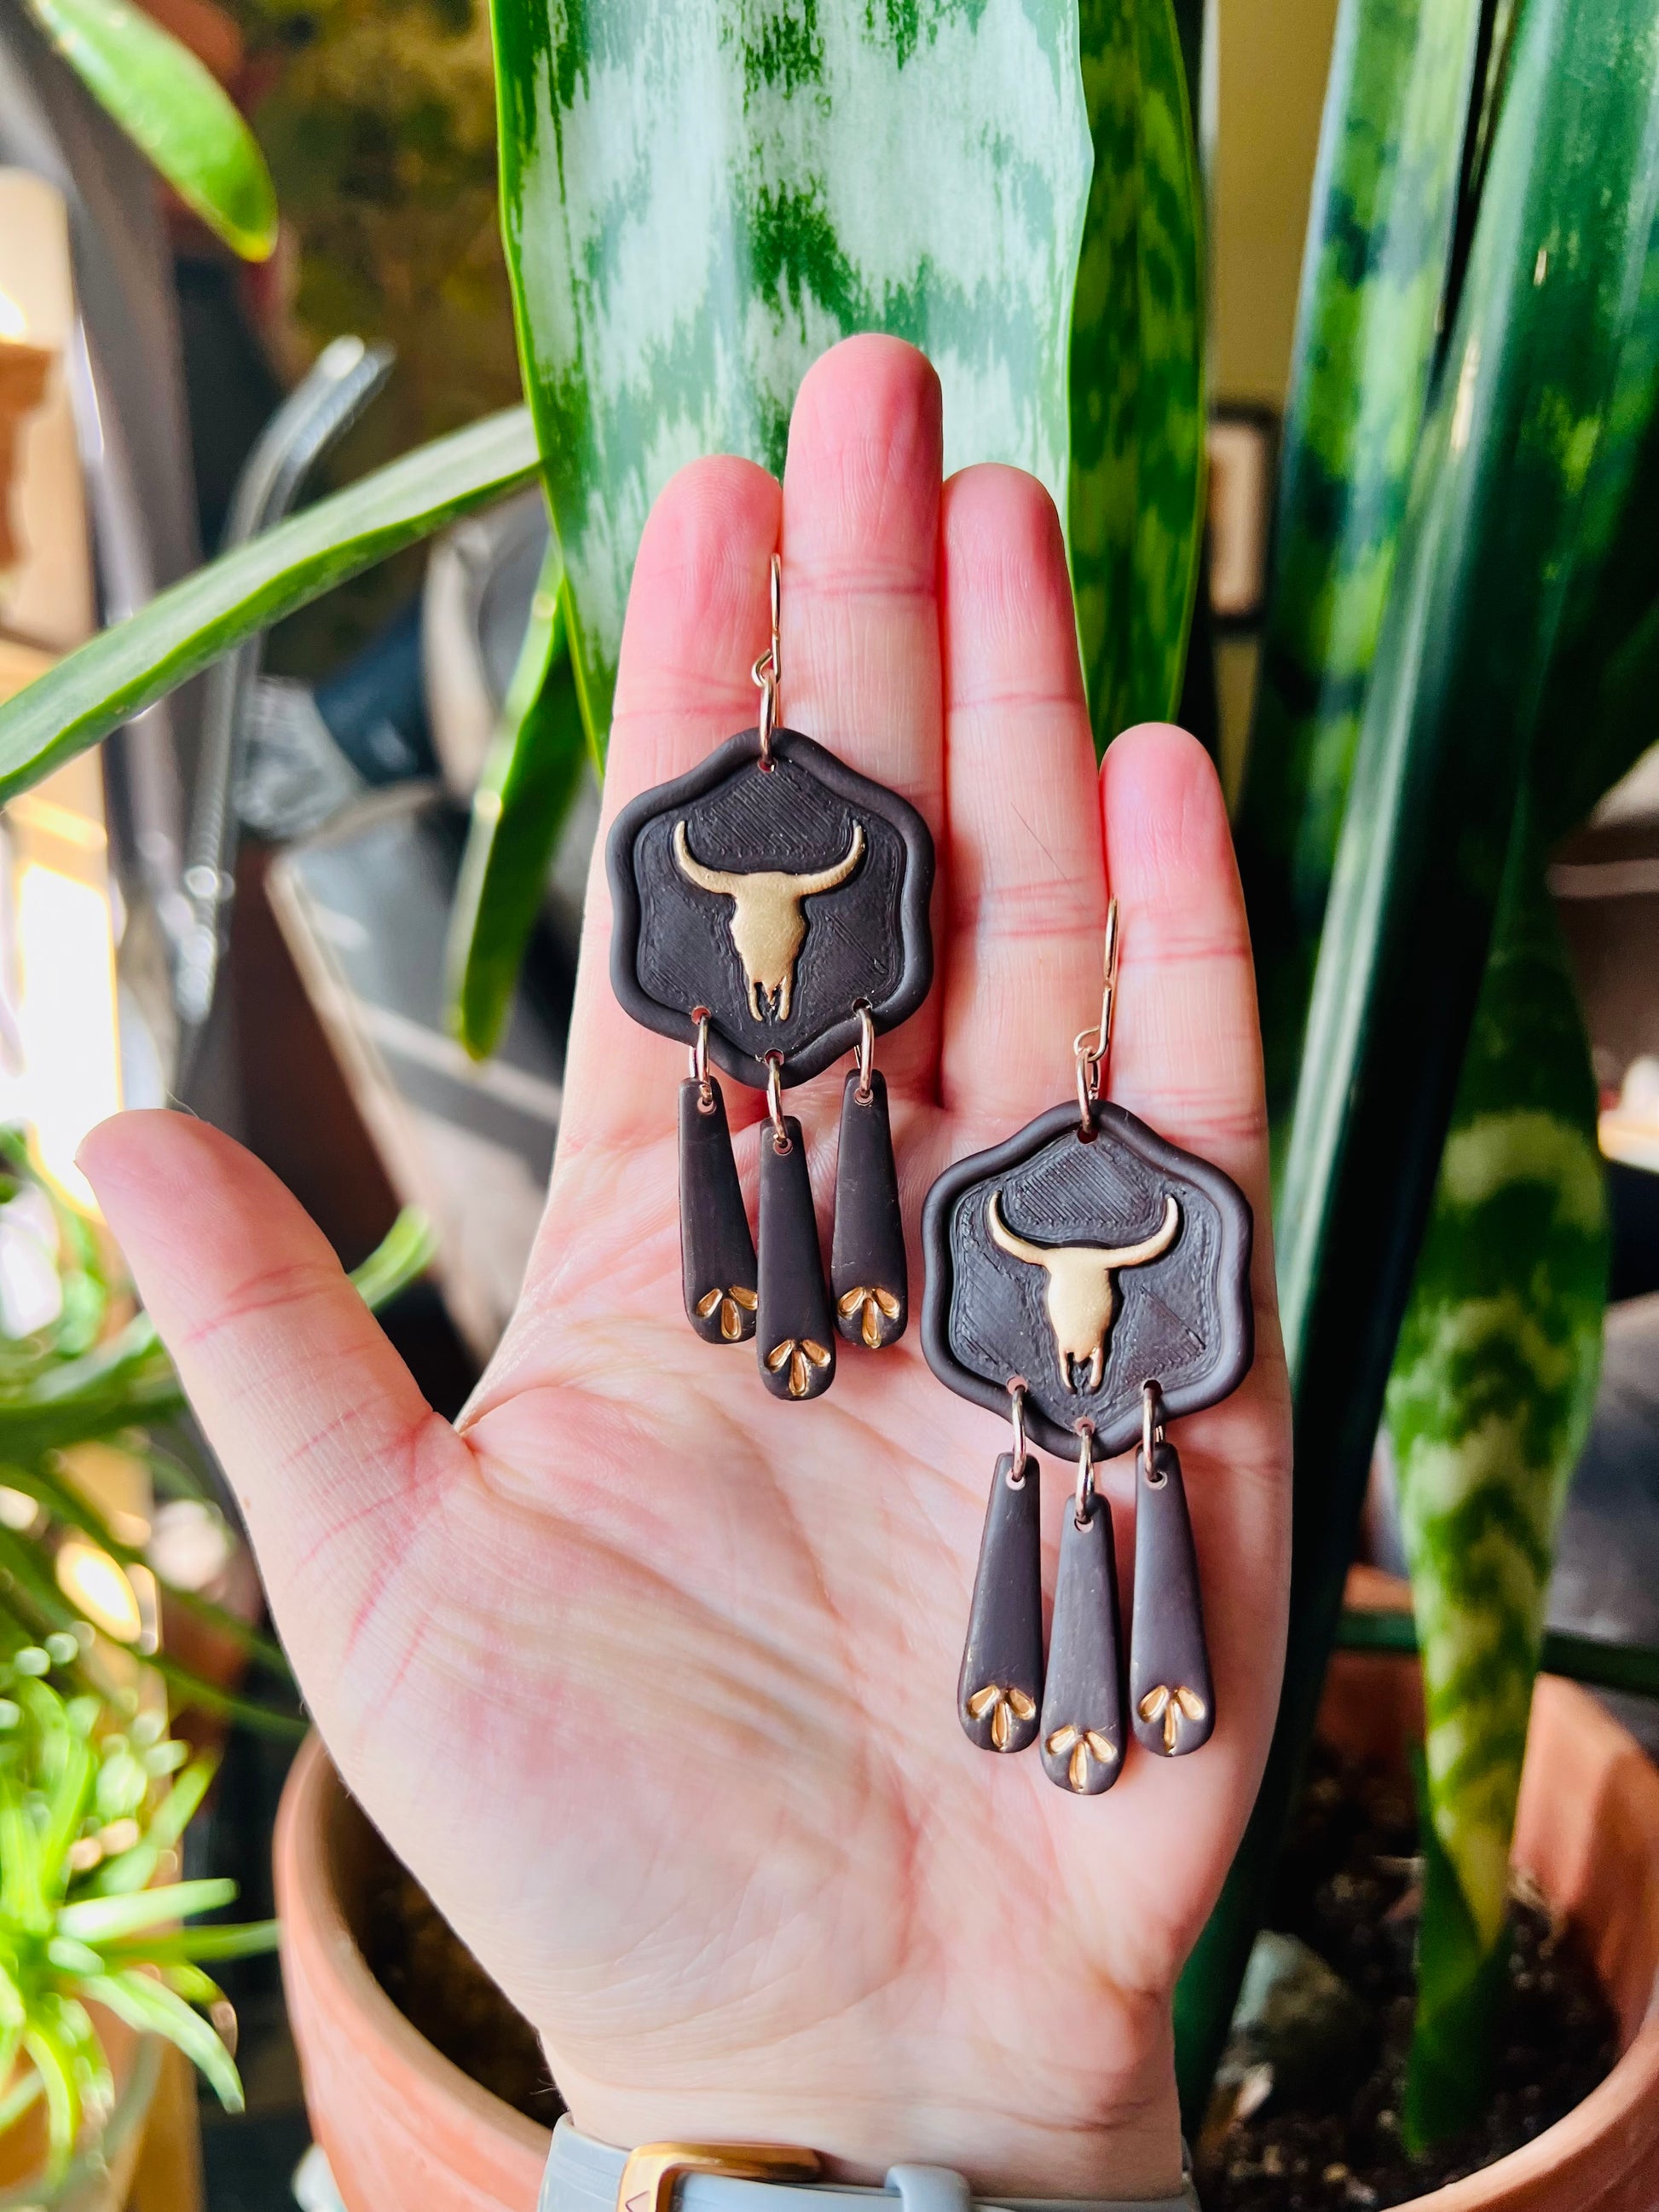 Complete your cowgirl ensemble with our metallic gold longhorn skull earrings, featuring deep brown accents for a touch of western flair. These statement earrings are perfect for adding rustic charm to any outfit.